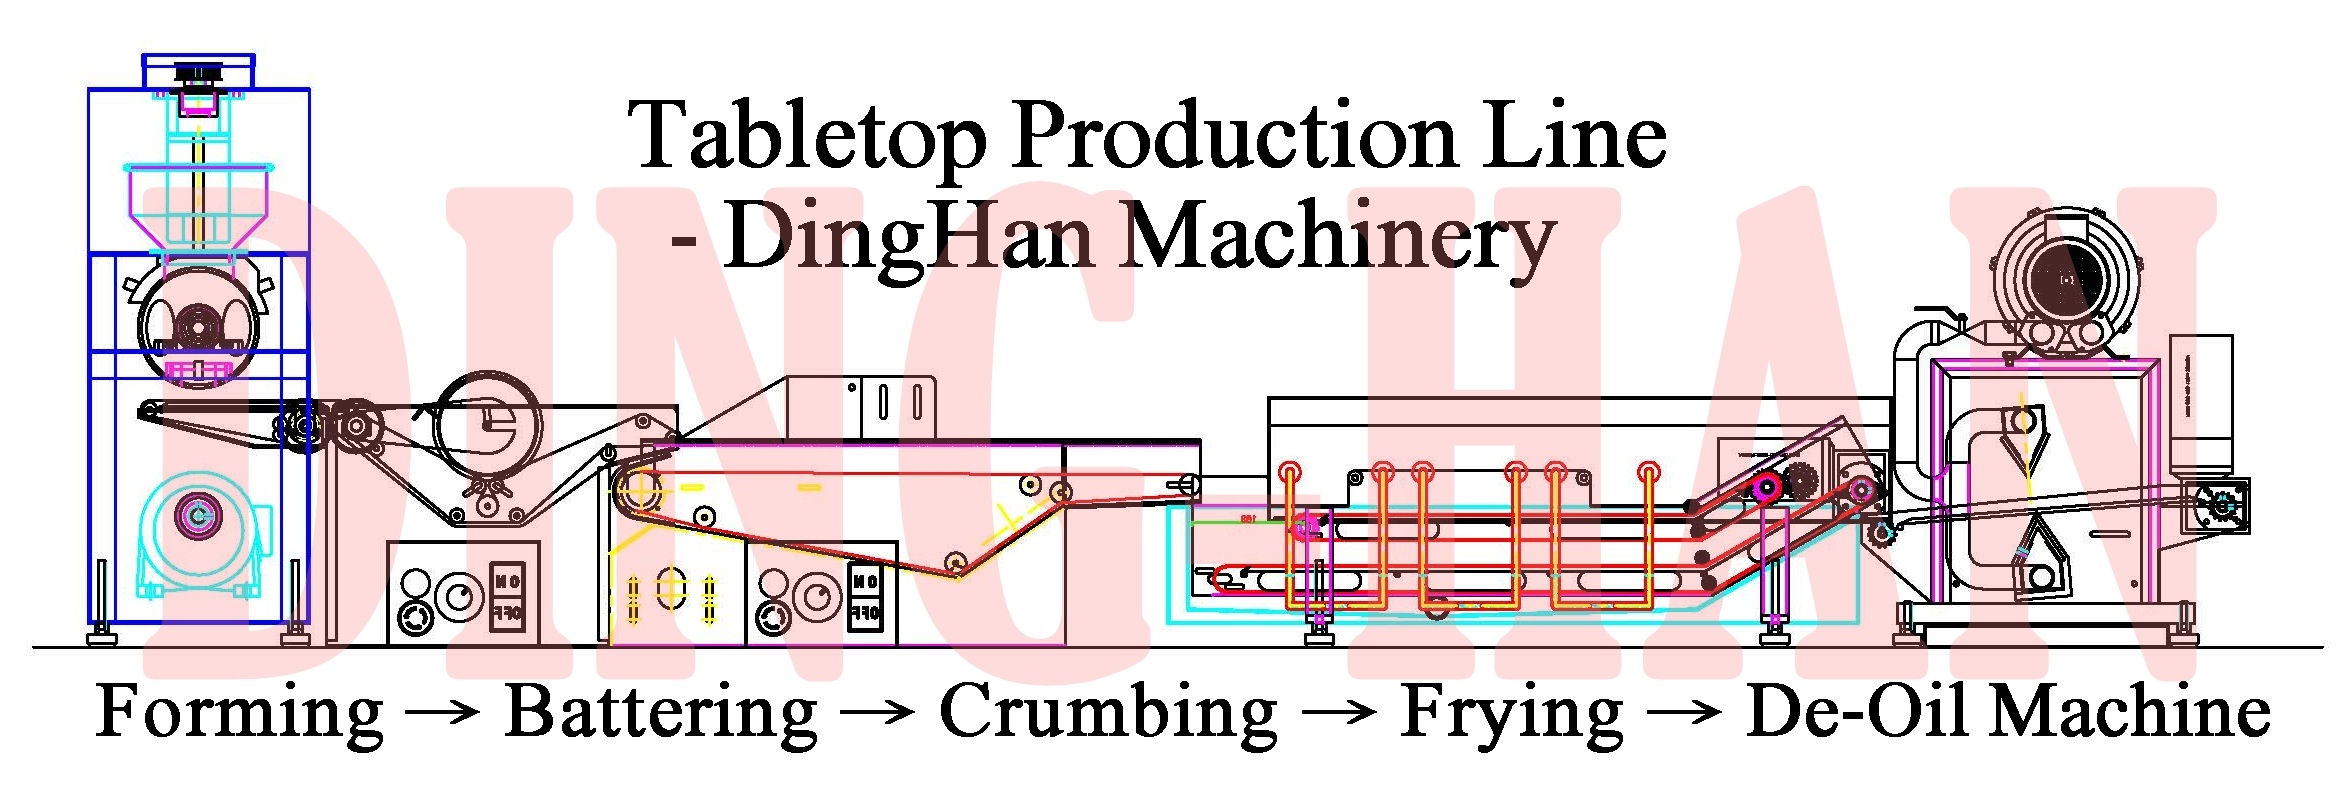 Tabletop Production Line